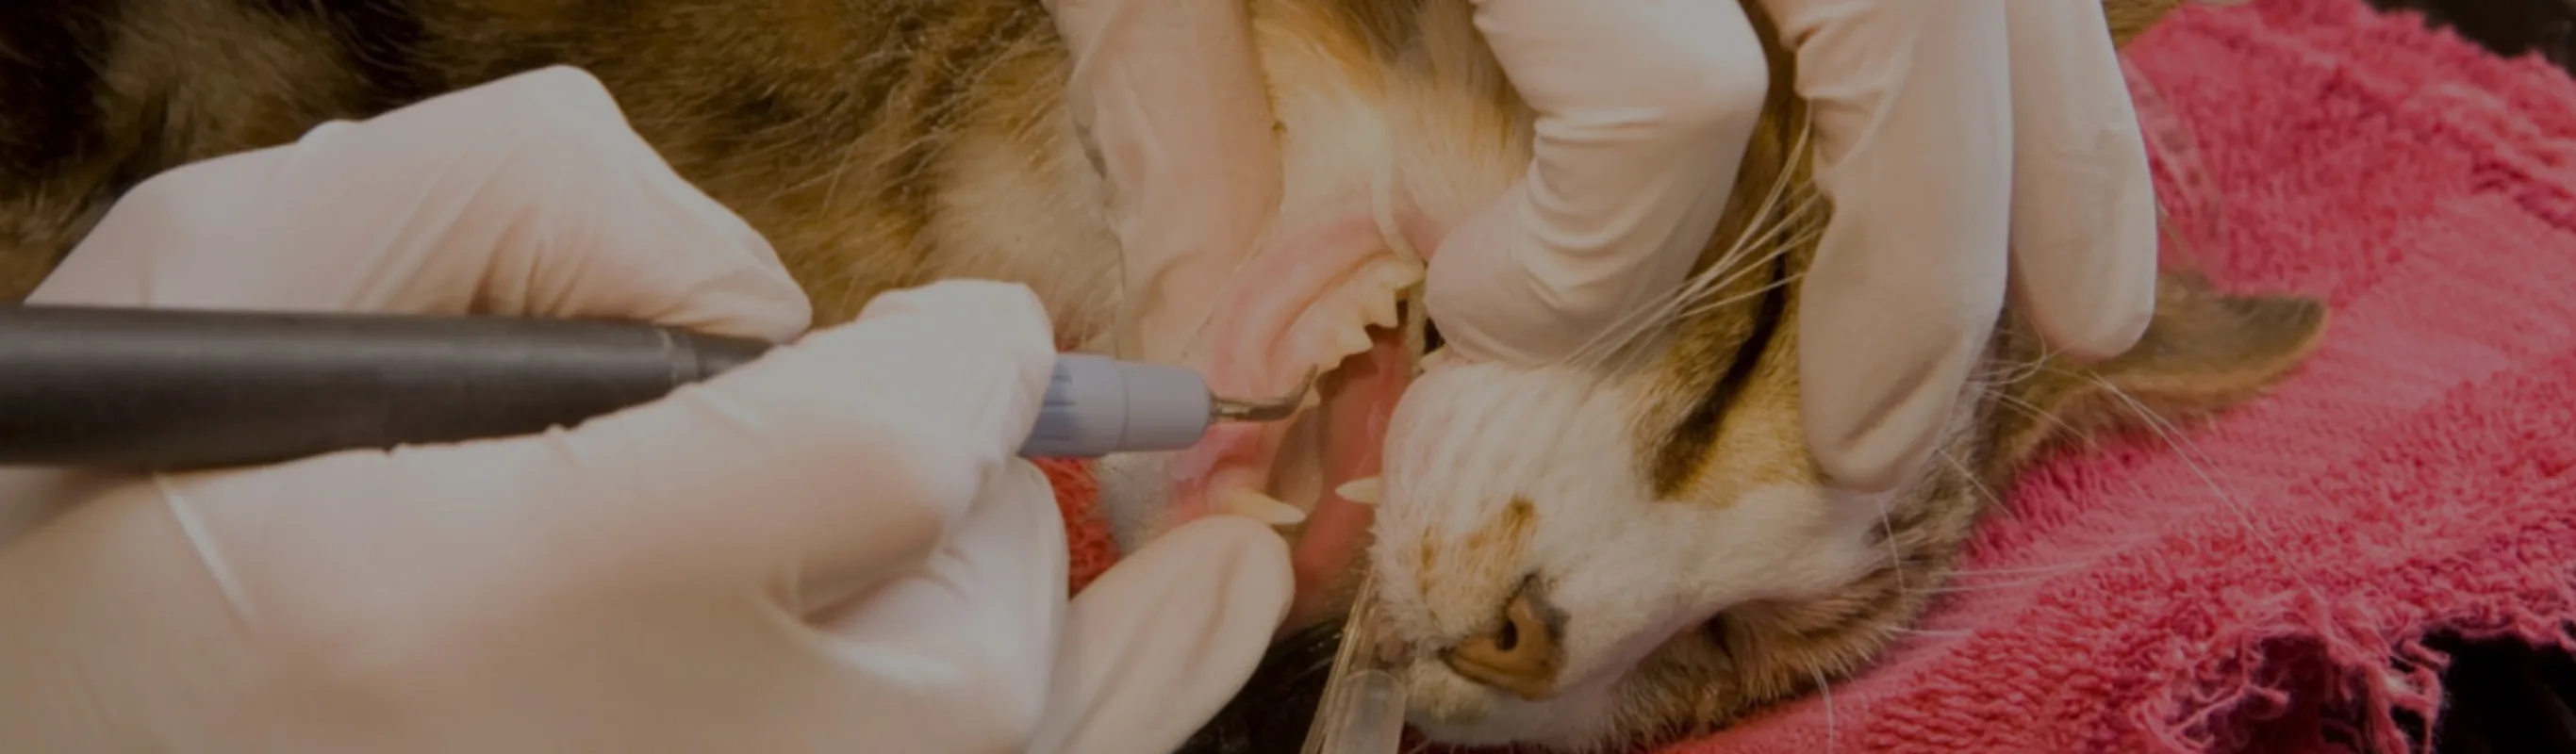 Orange cat receiving dental treatment laying on a pink blanket